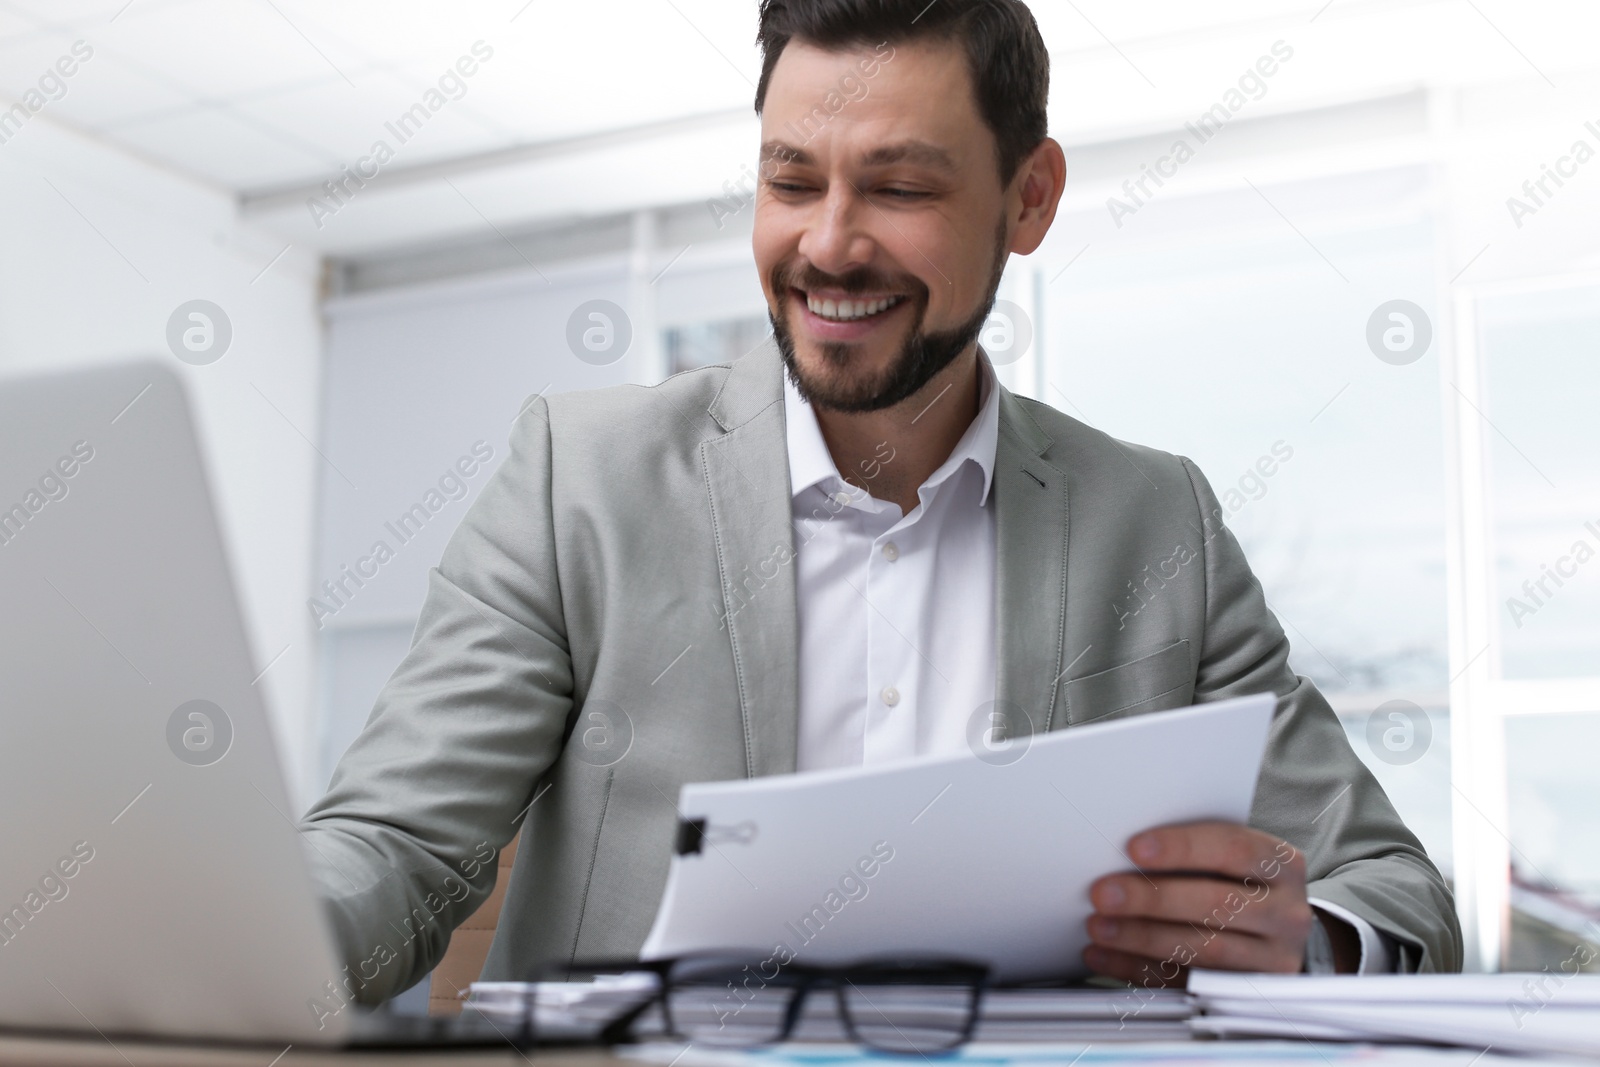 Photo of Businessman working with laptop and documents at table in office